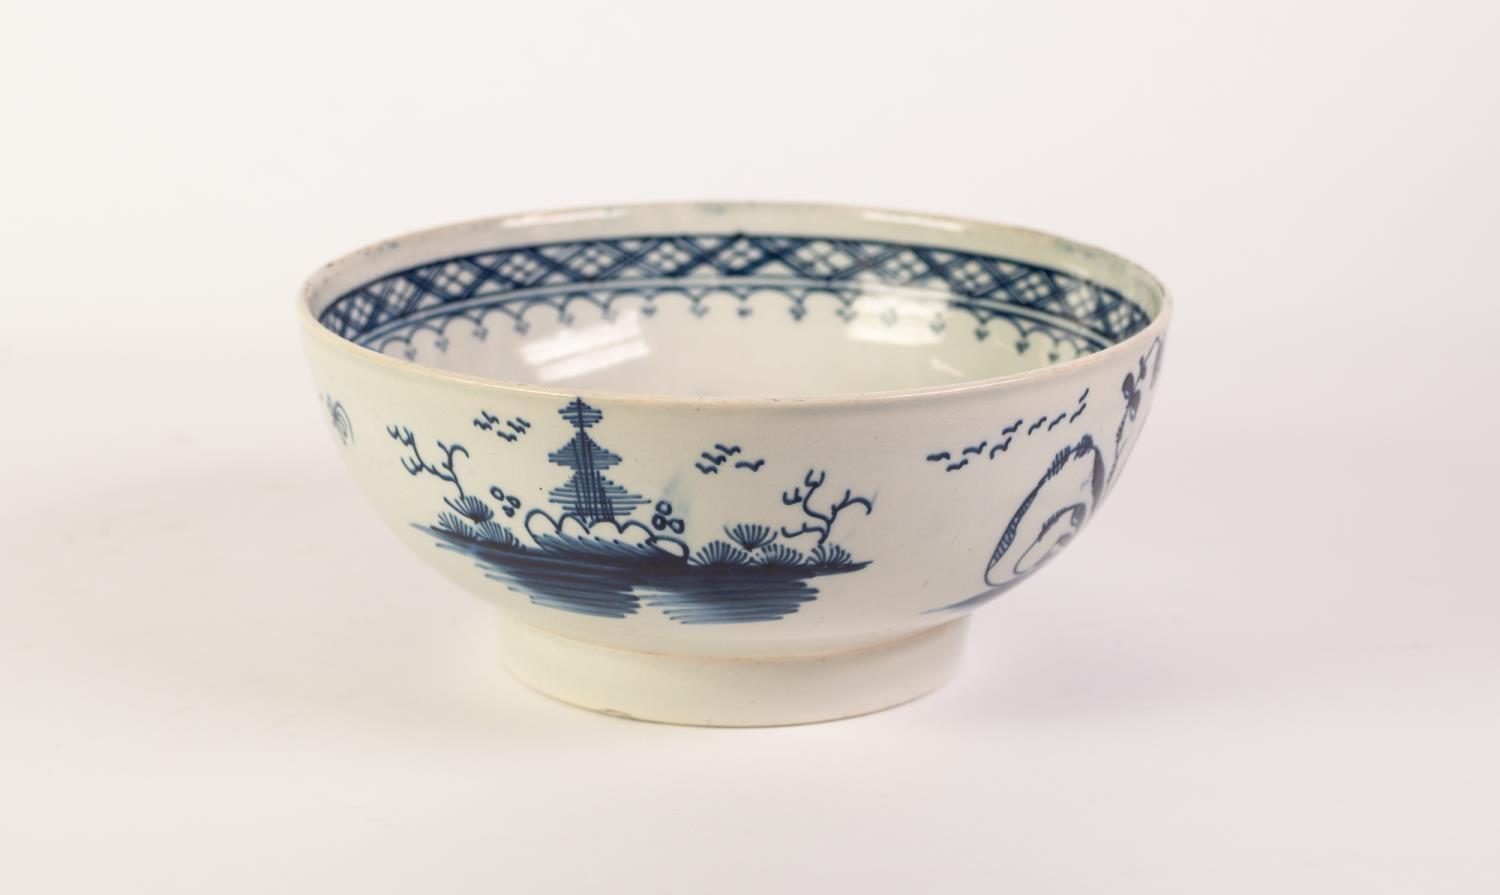 LATE 18th CENTURY, PROBABLY LIVERPOOL, PEARLWARE BOWL painted in underglaze blue with an, almost - Image 2 of 2